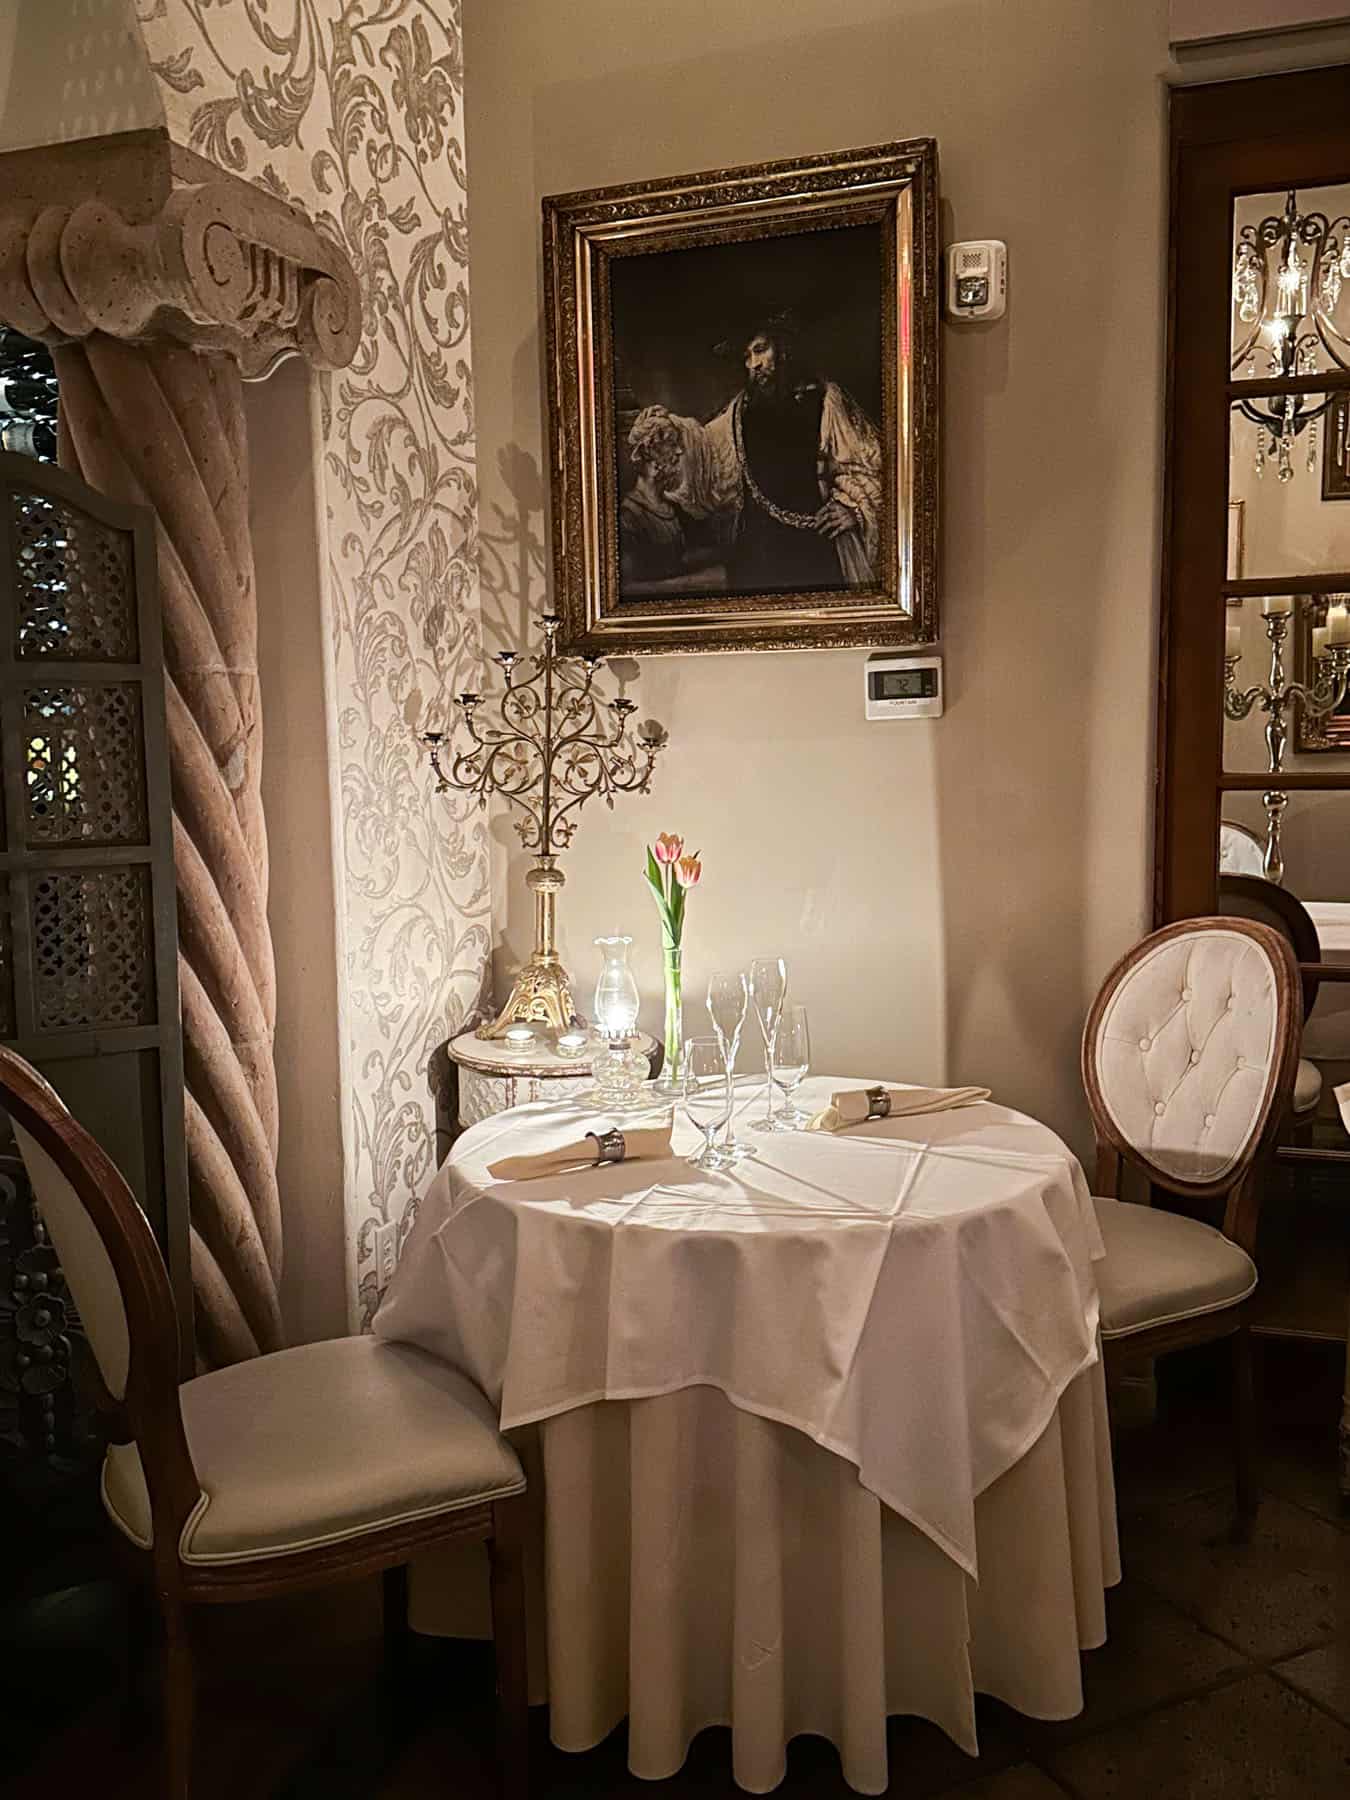 the interior of the restaurant (chairs, dining table with a vase and folded napkins - against the wall with a painting on the wall) at Cafe Monarch in Scottsdale AZ.